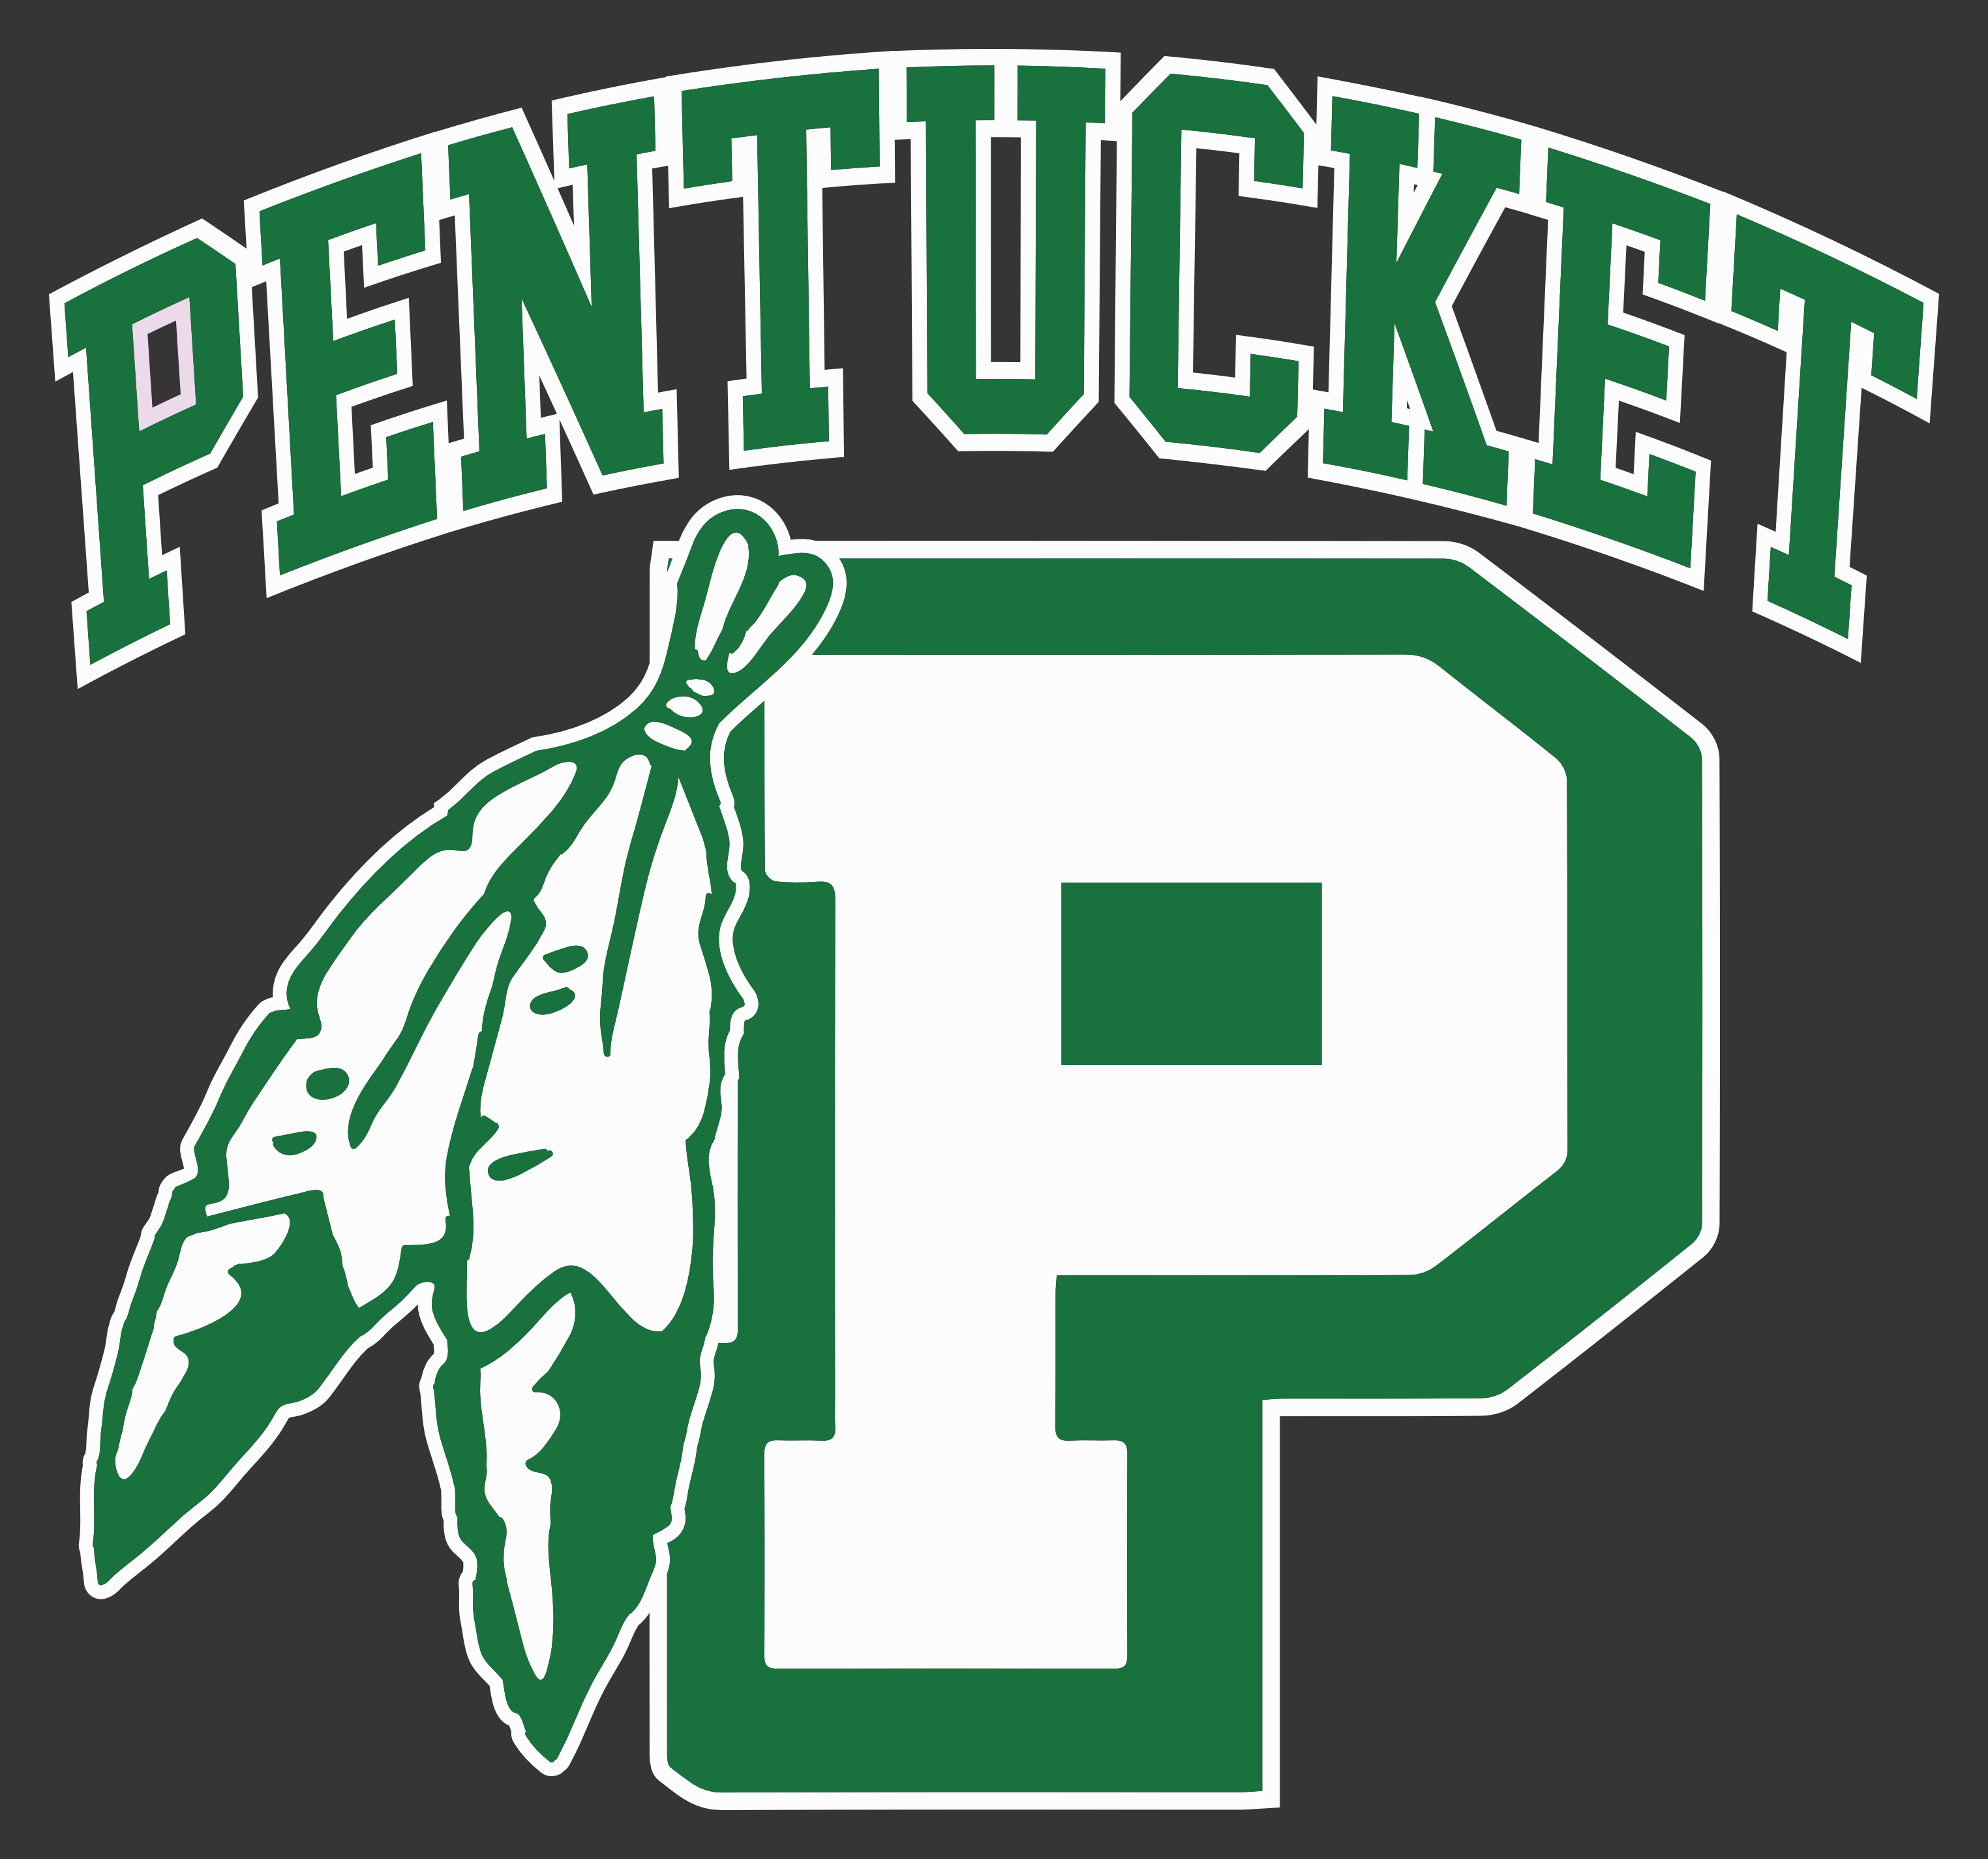 Pentucket P with Feathers and Text Print Design